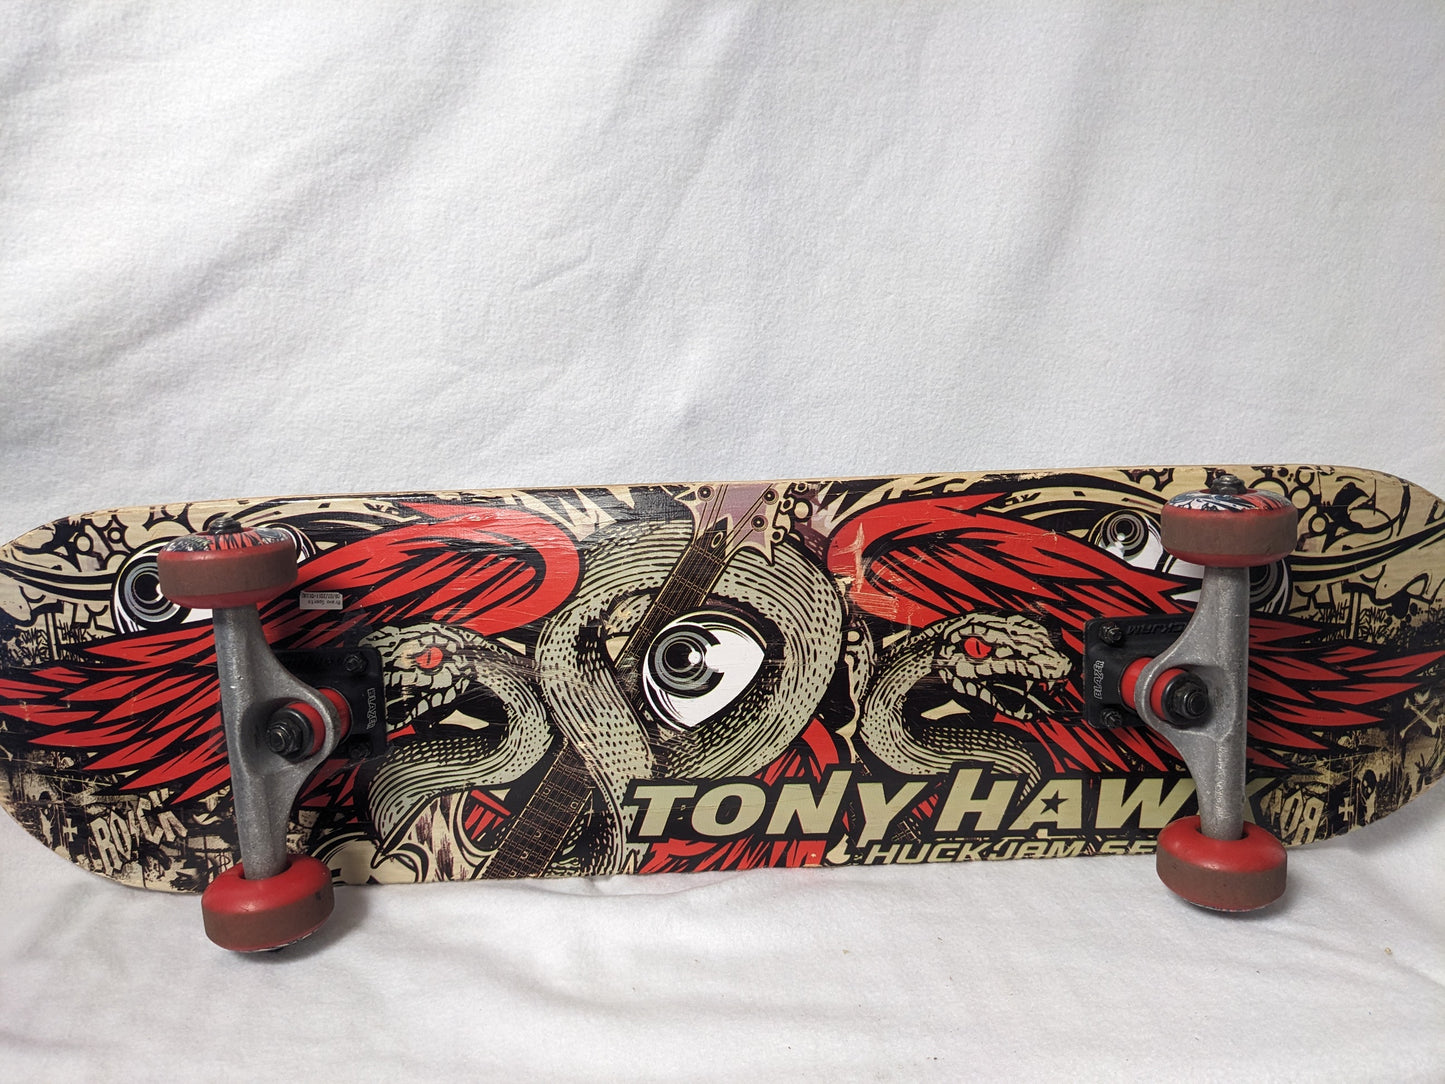 Tony Hawk Huck Jam Series Skateboard Size 31 In Color Black Condition Used